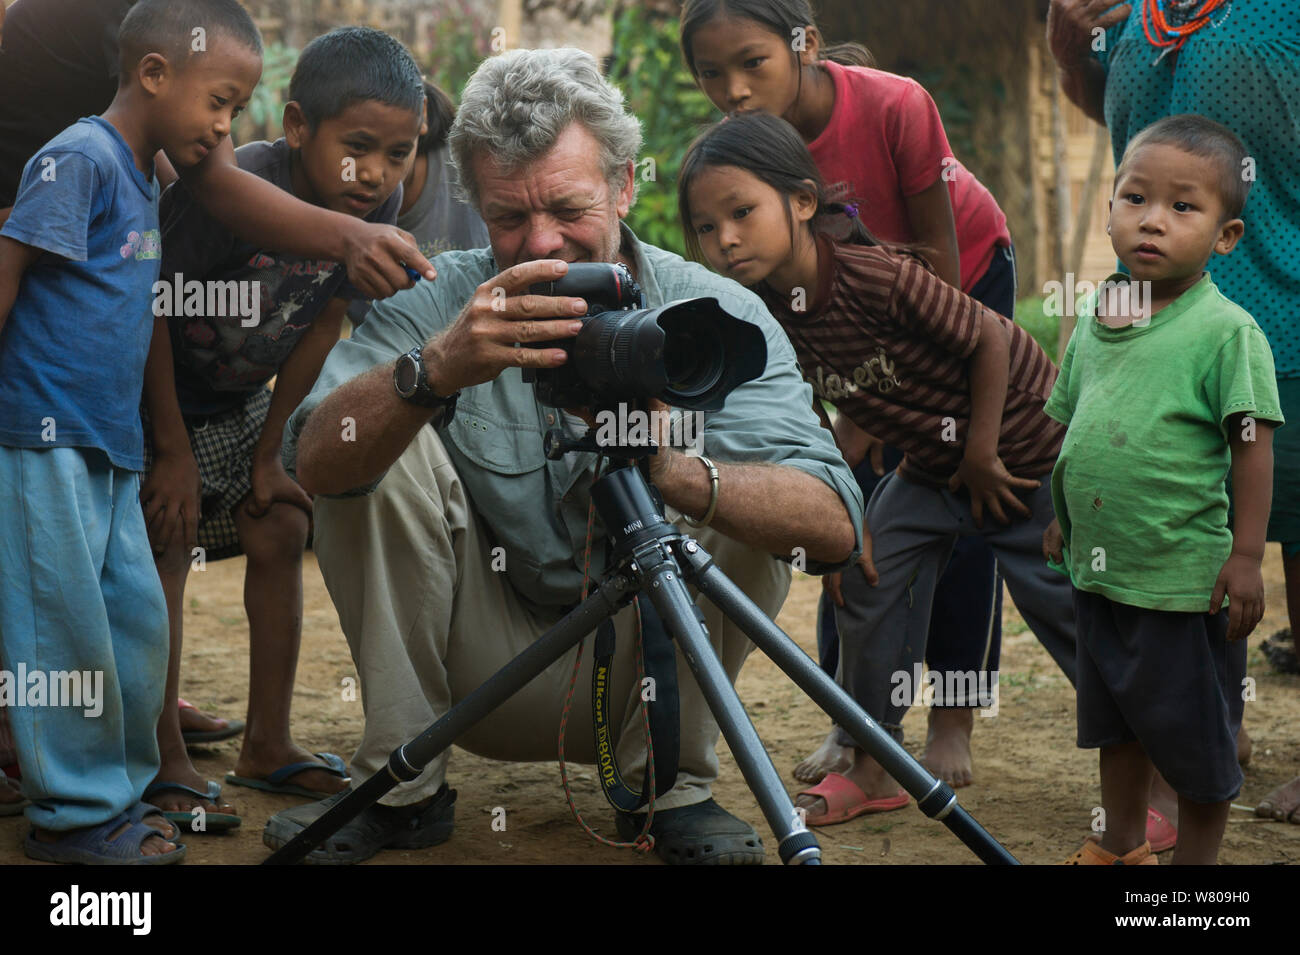 Photographer Pete Oxford with Naga head hunters children watching him take photos. Nagaland,  North East India, October 2014. Stock Photo